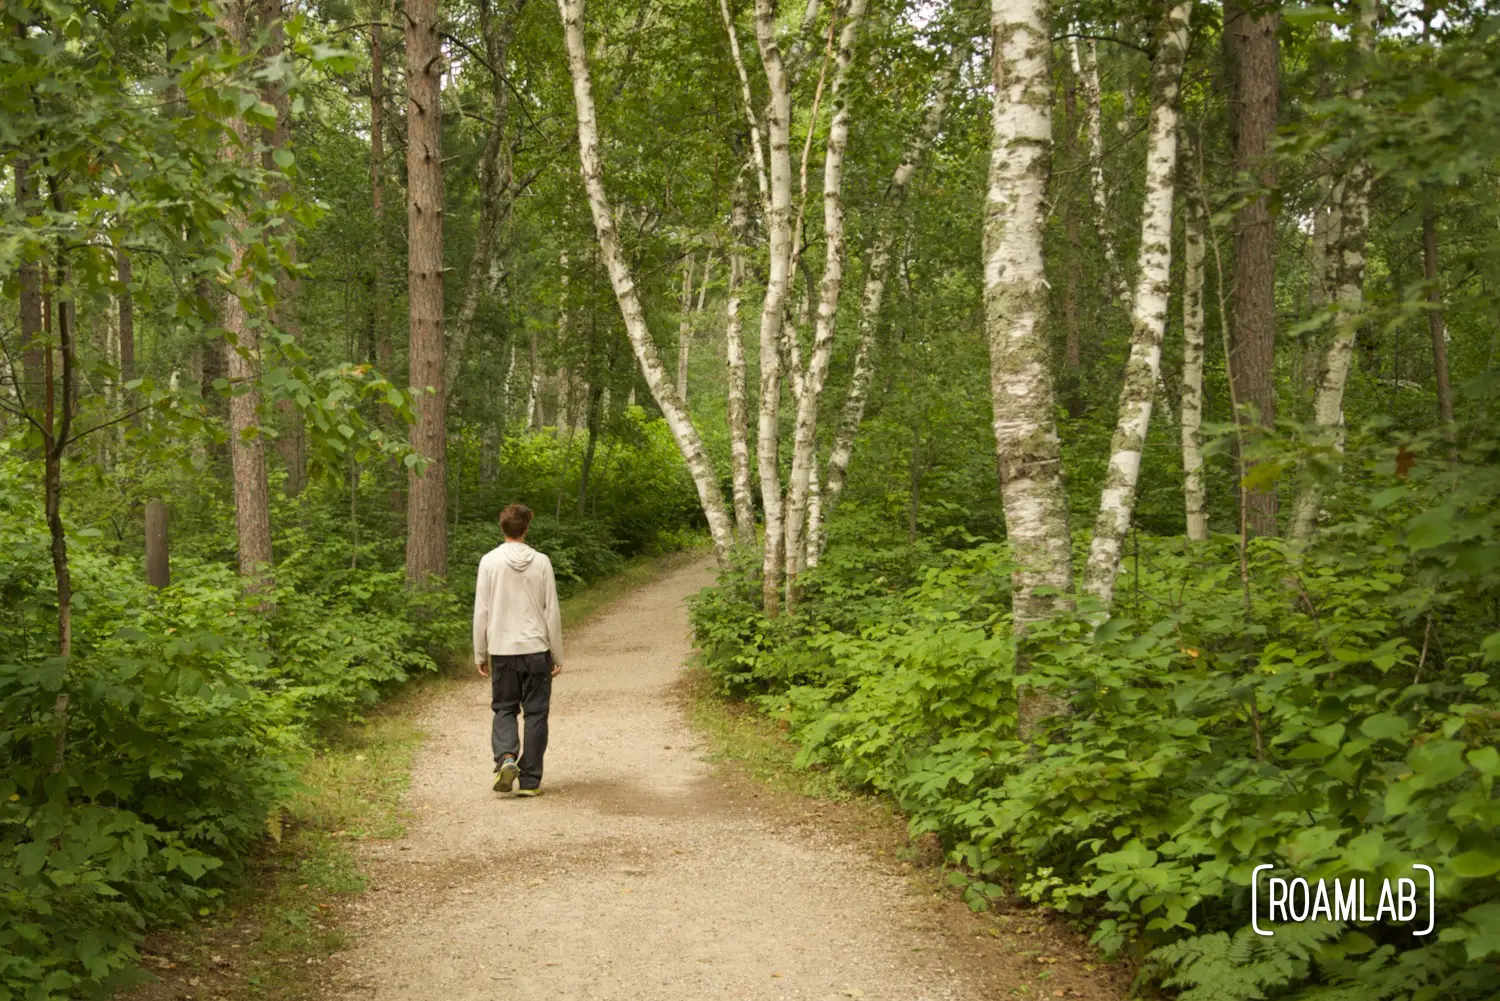 Man walking along a dirt path surrounded by aspen and pine trees.